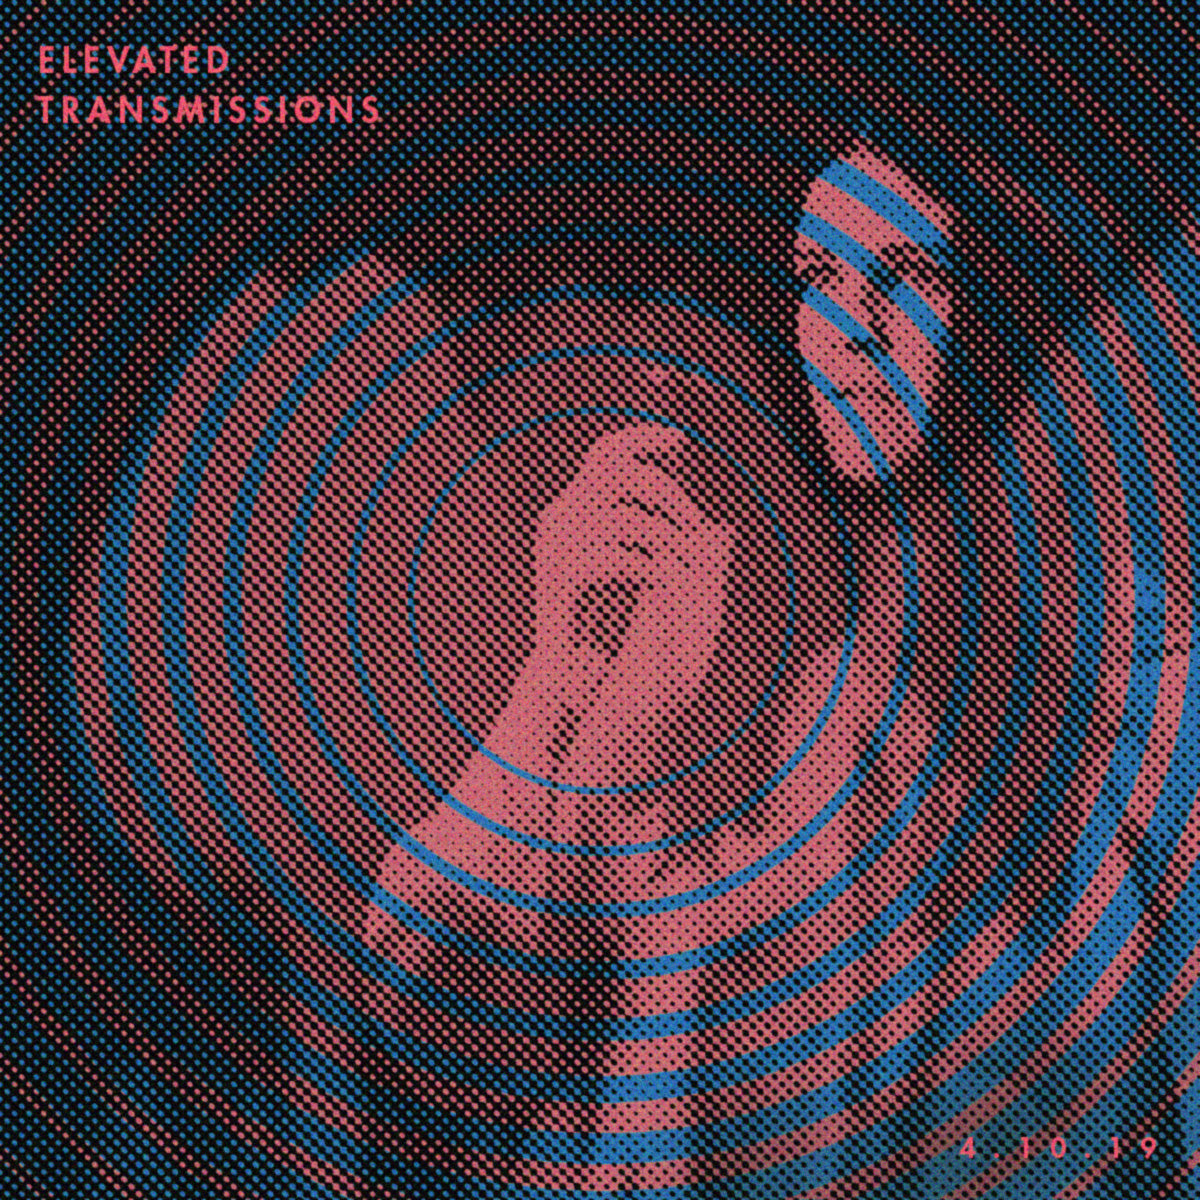 ELEVATED TRANSMISSIONS | 4.10.19